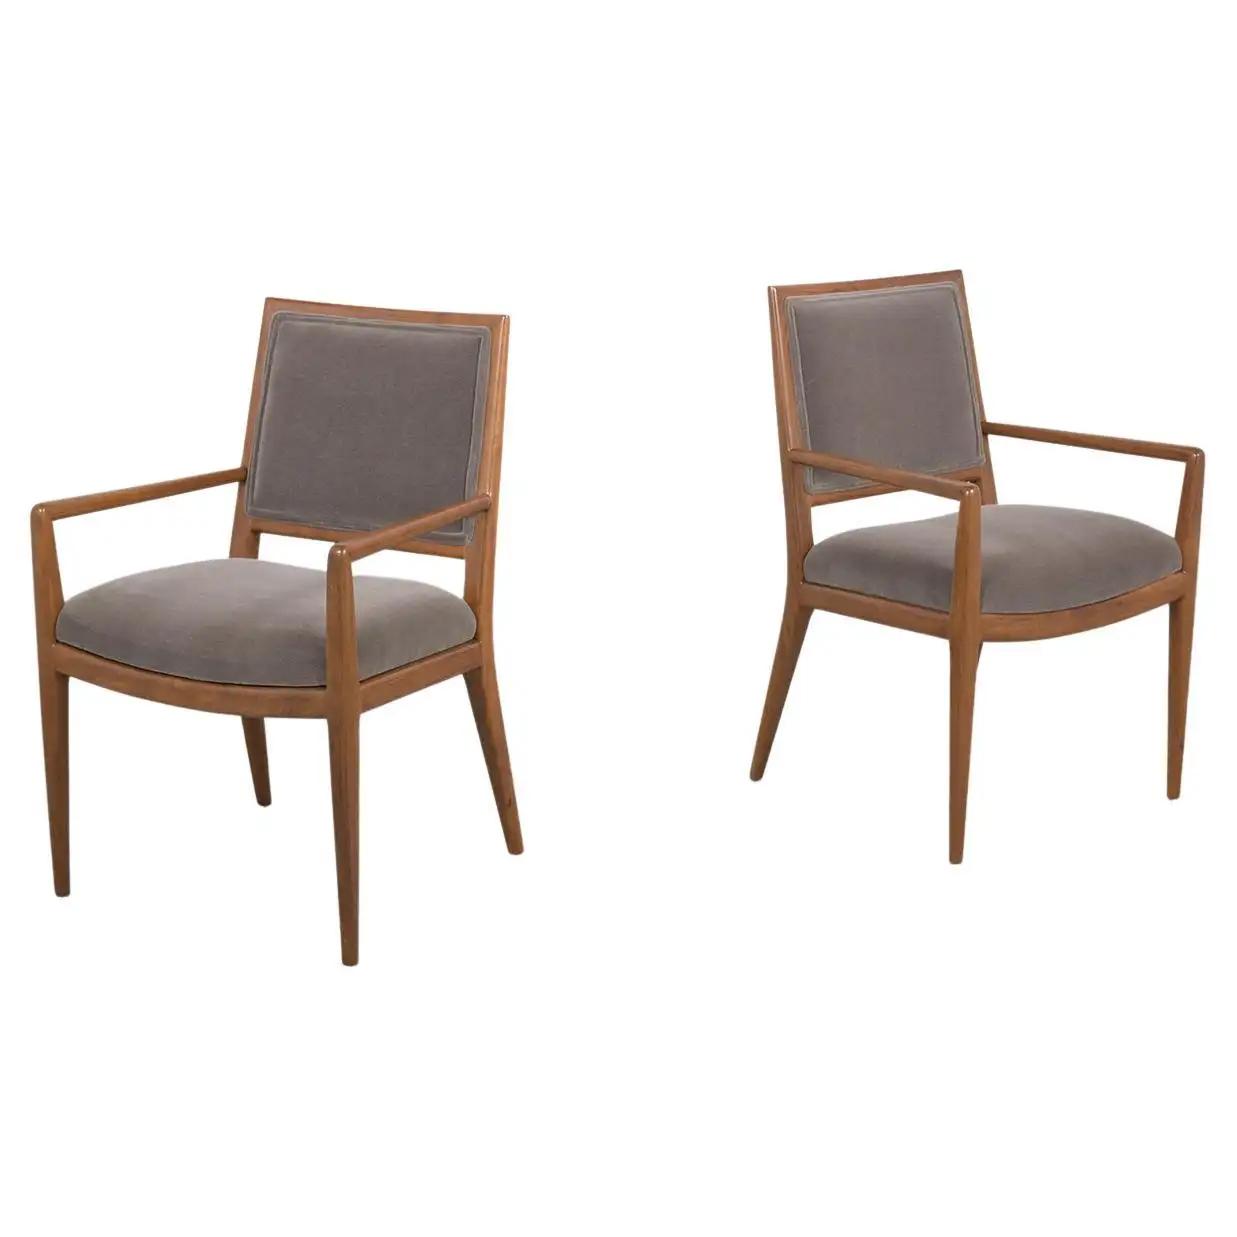 Pair of Vintage Upholstery Mid-Century Modern Armchairs